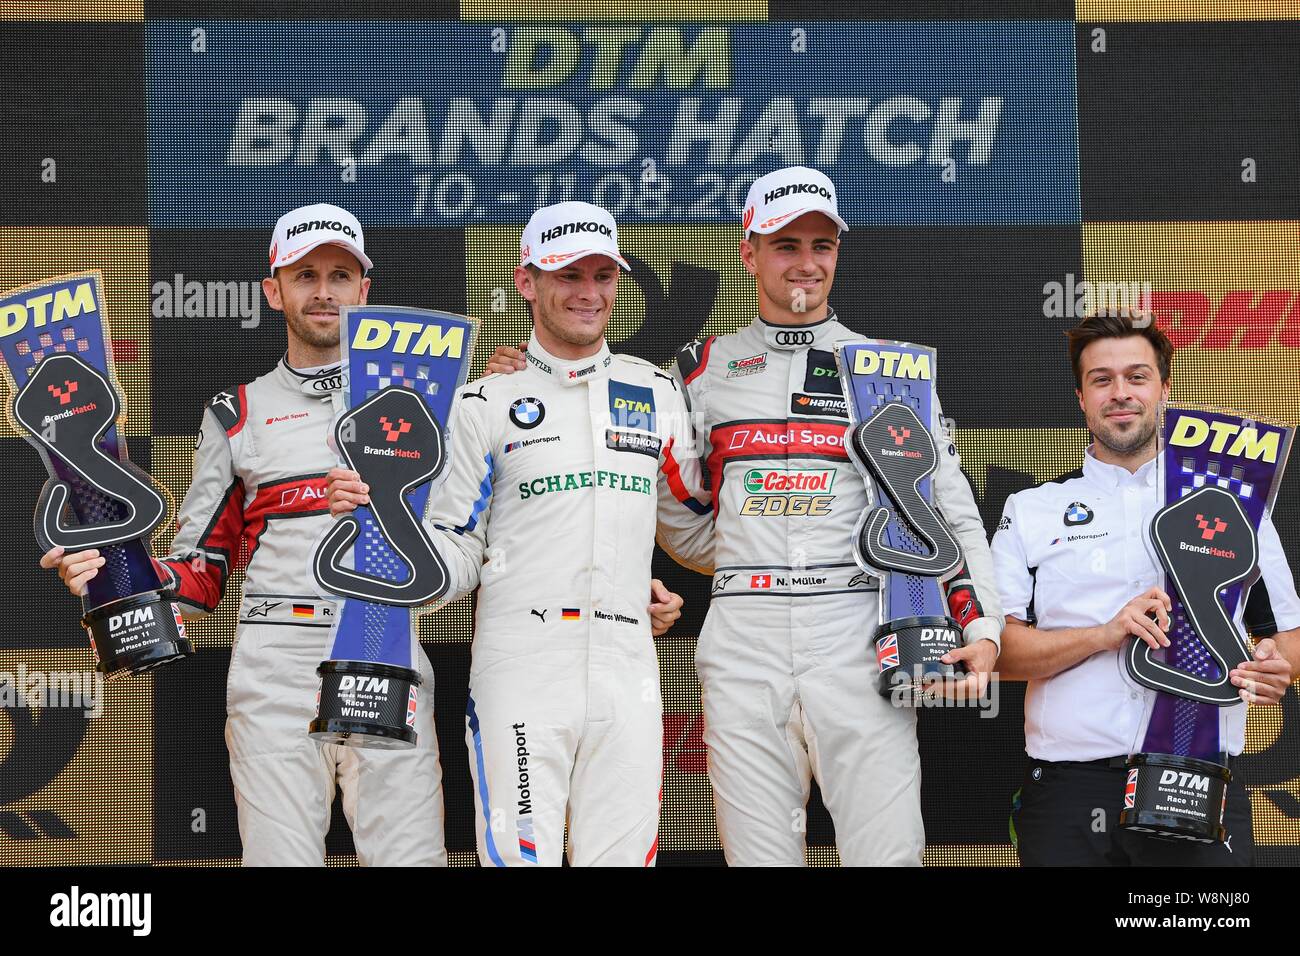 KENT, UNITED KINGDOM. 10th Aug, 2019. Marco Wittmann (BMW Team RMG) (centre), René Rast (Audi Sport Team Rosberg) (left) and Nico Müller (Audi Sport Team Abt Sportsline) popped Champagne at Winners presentation after DTM Race 1 during DTM (German Touring Cars) and W Series at Brands Hatch GP Circuit on Saturday, August 10, 2019 in KENT, ENGLAND. Credit: Taka G Wu/Alamy Live News Stock Photo